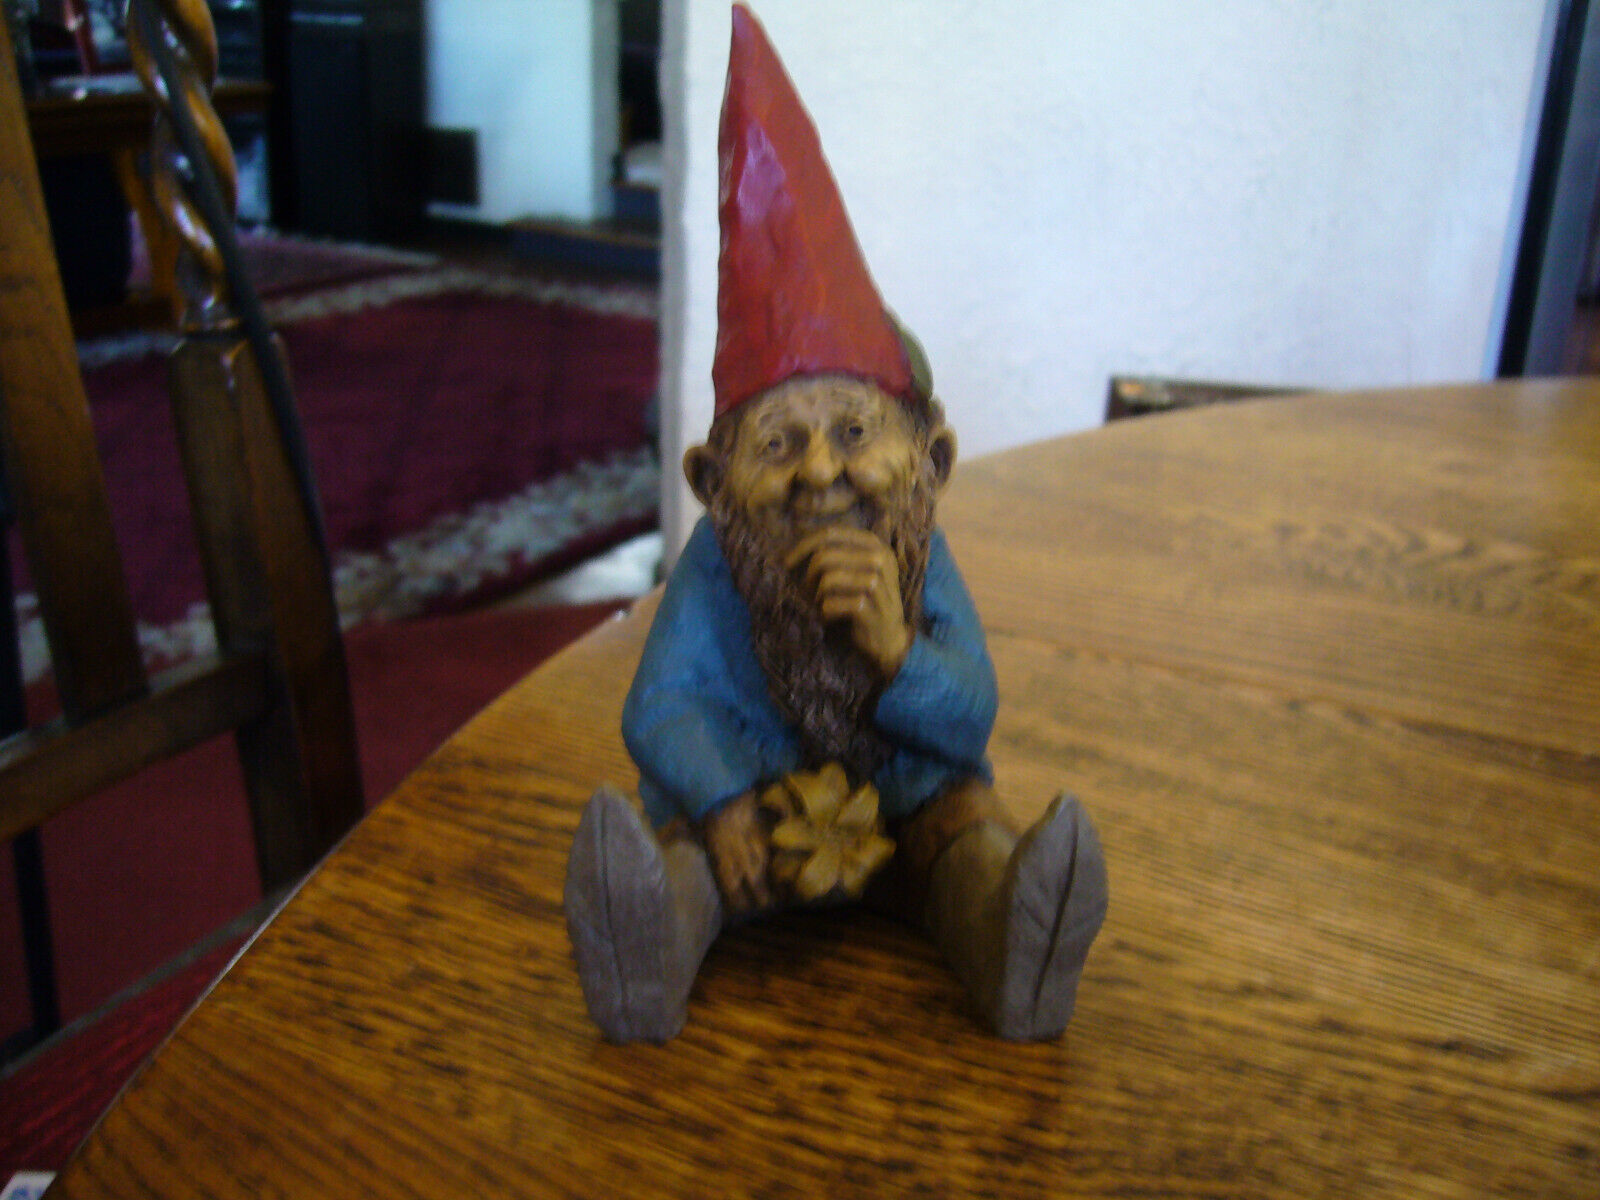 Tom Clark Gnome MUGMON Signed By Tom Clark Cairn Studio Dated 1984 COA and Story